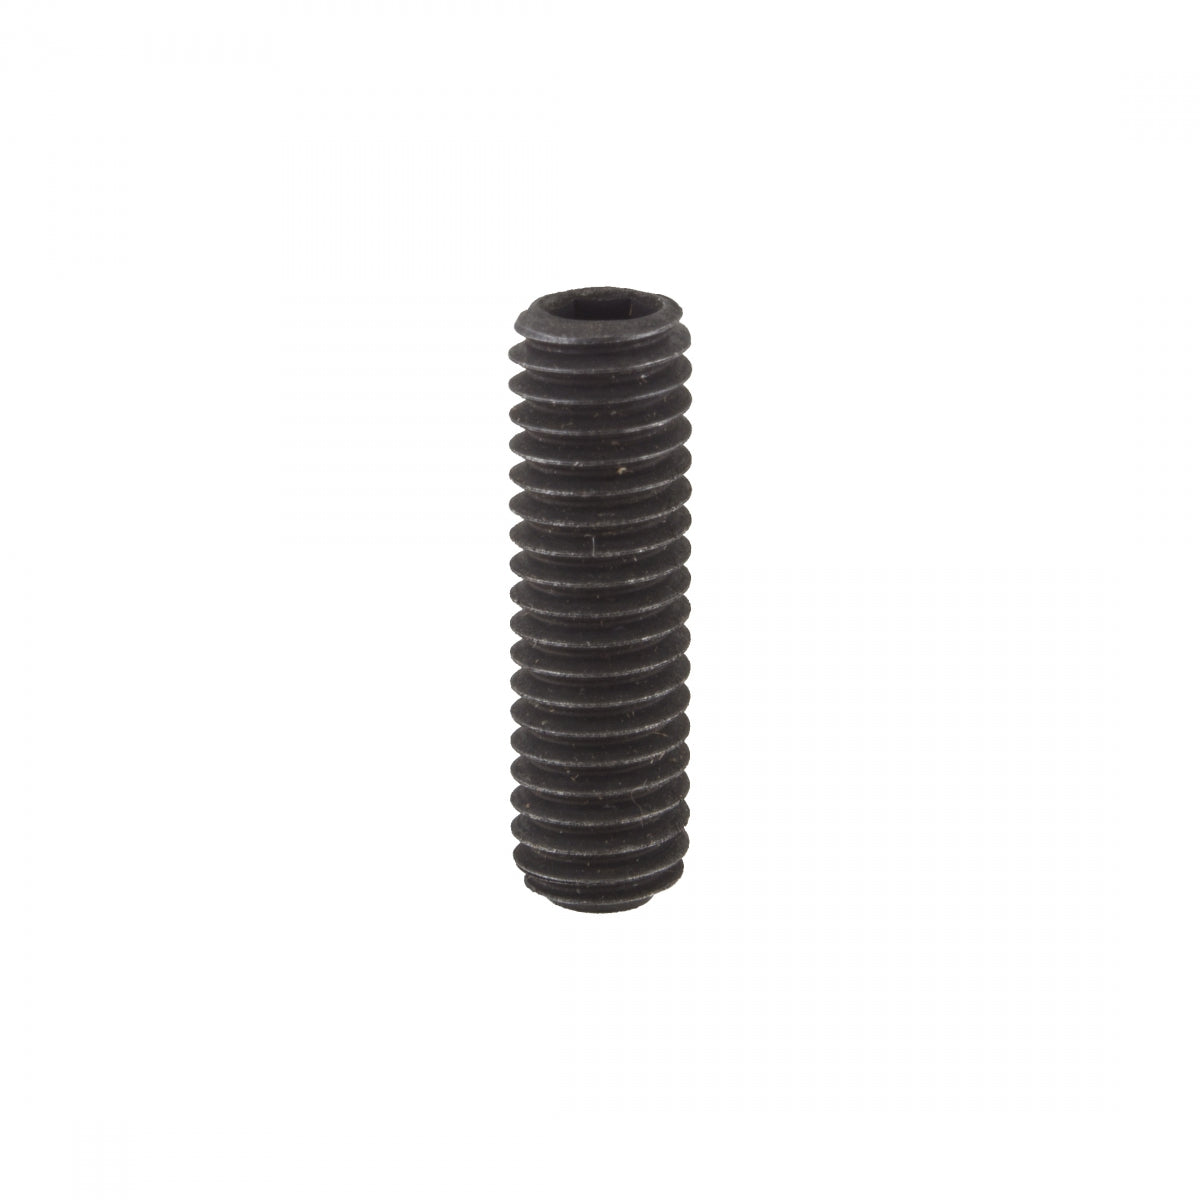 Park Tool #822Â Replacement Nut Setter for 1â€ and 1 1/8â€ Threadless Headset Systems, 6mm Screw